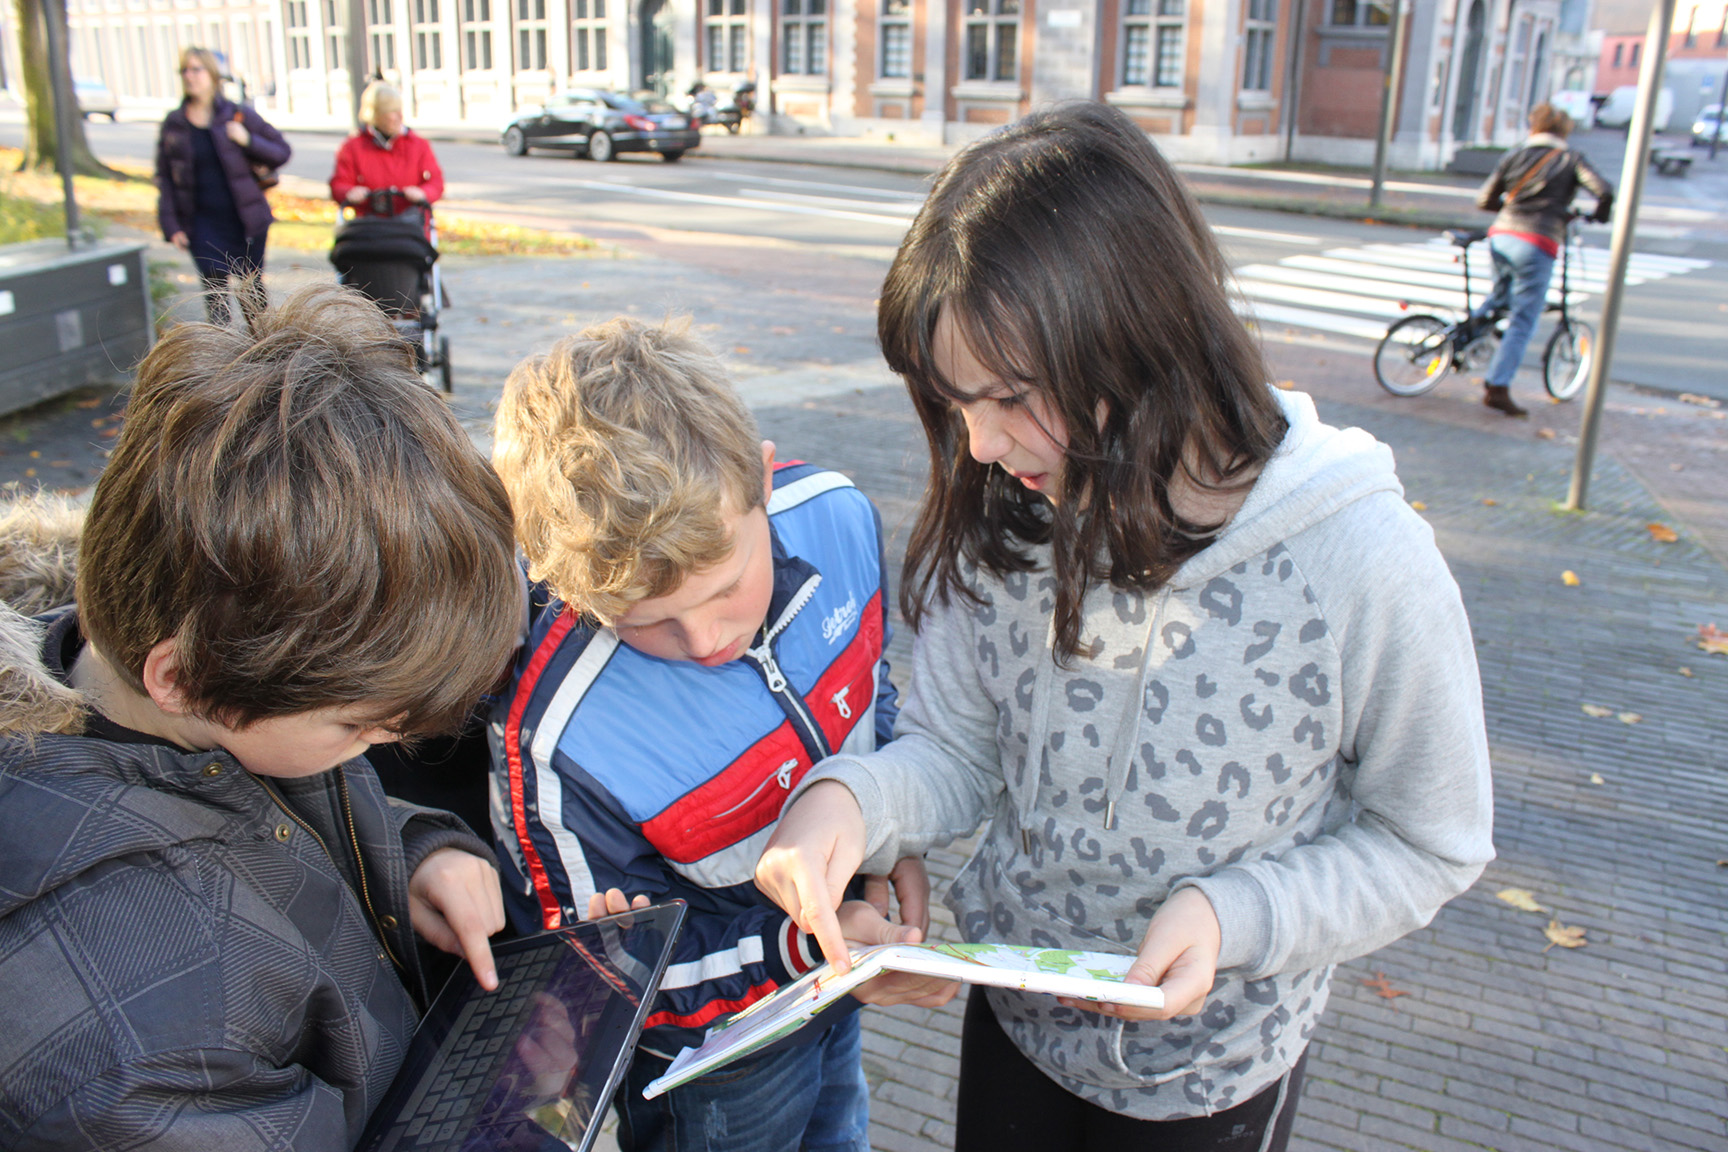 Children with a tablet on the street